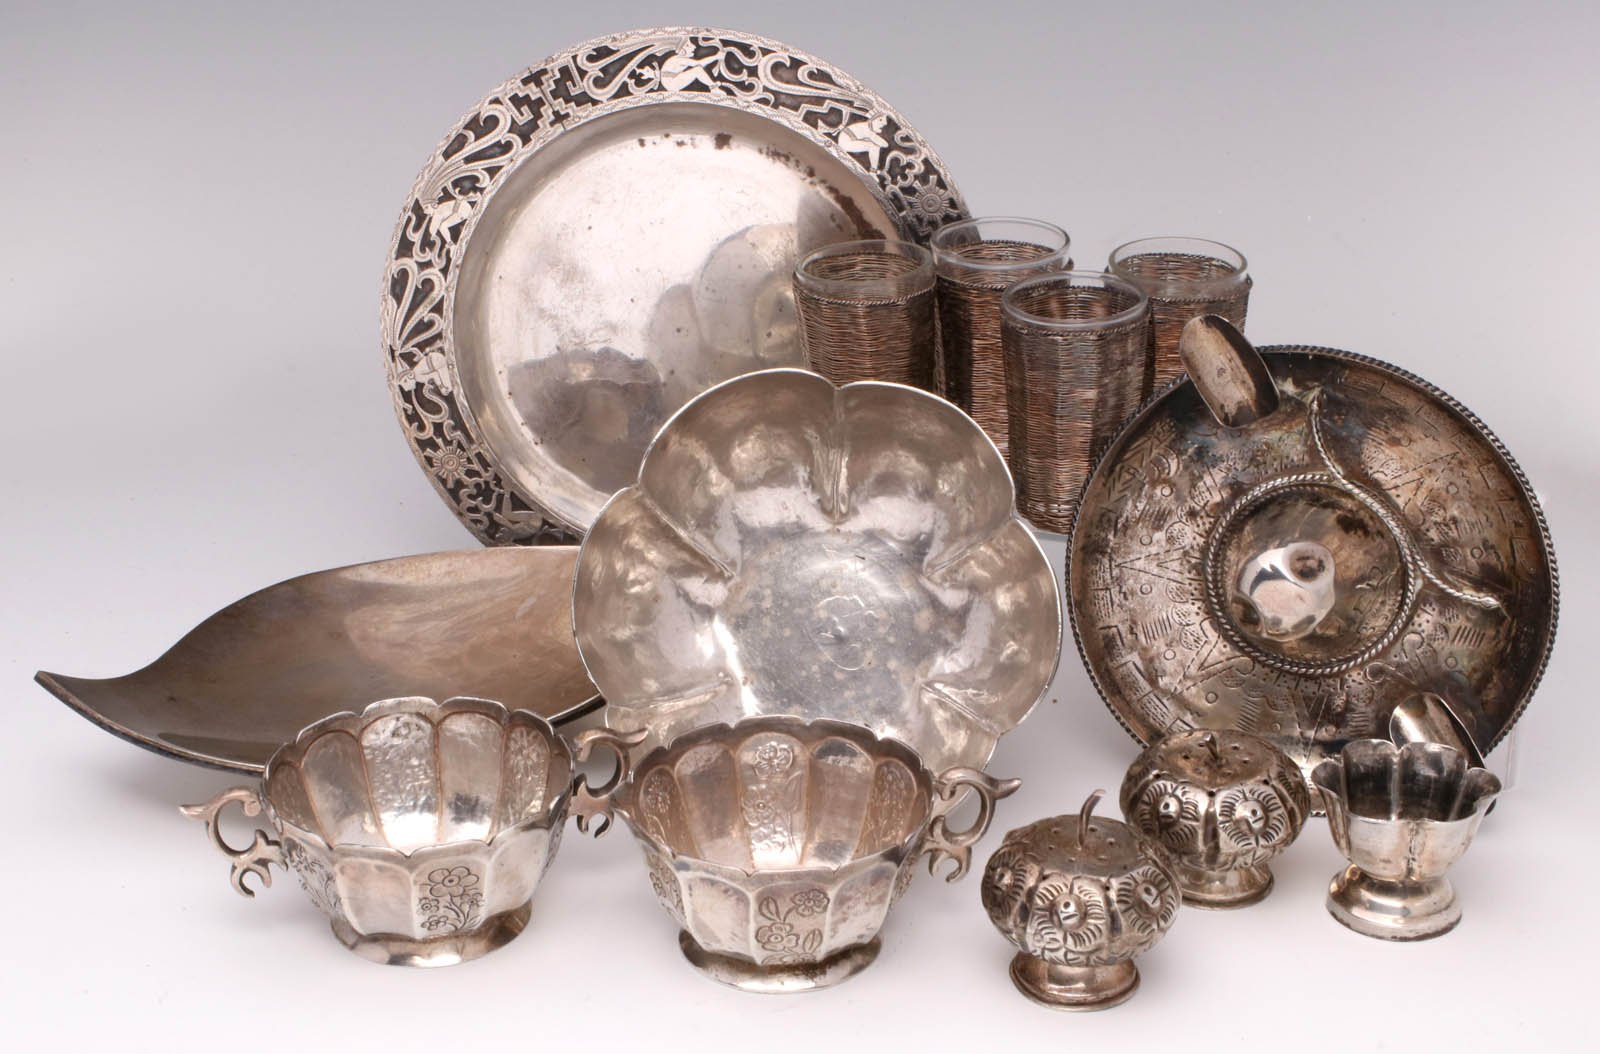 A GROUPING OF MEXICAN STERLING SILVER OBJECTS